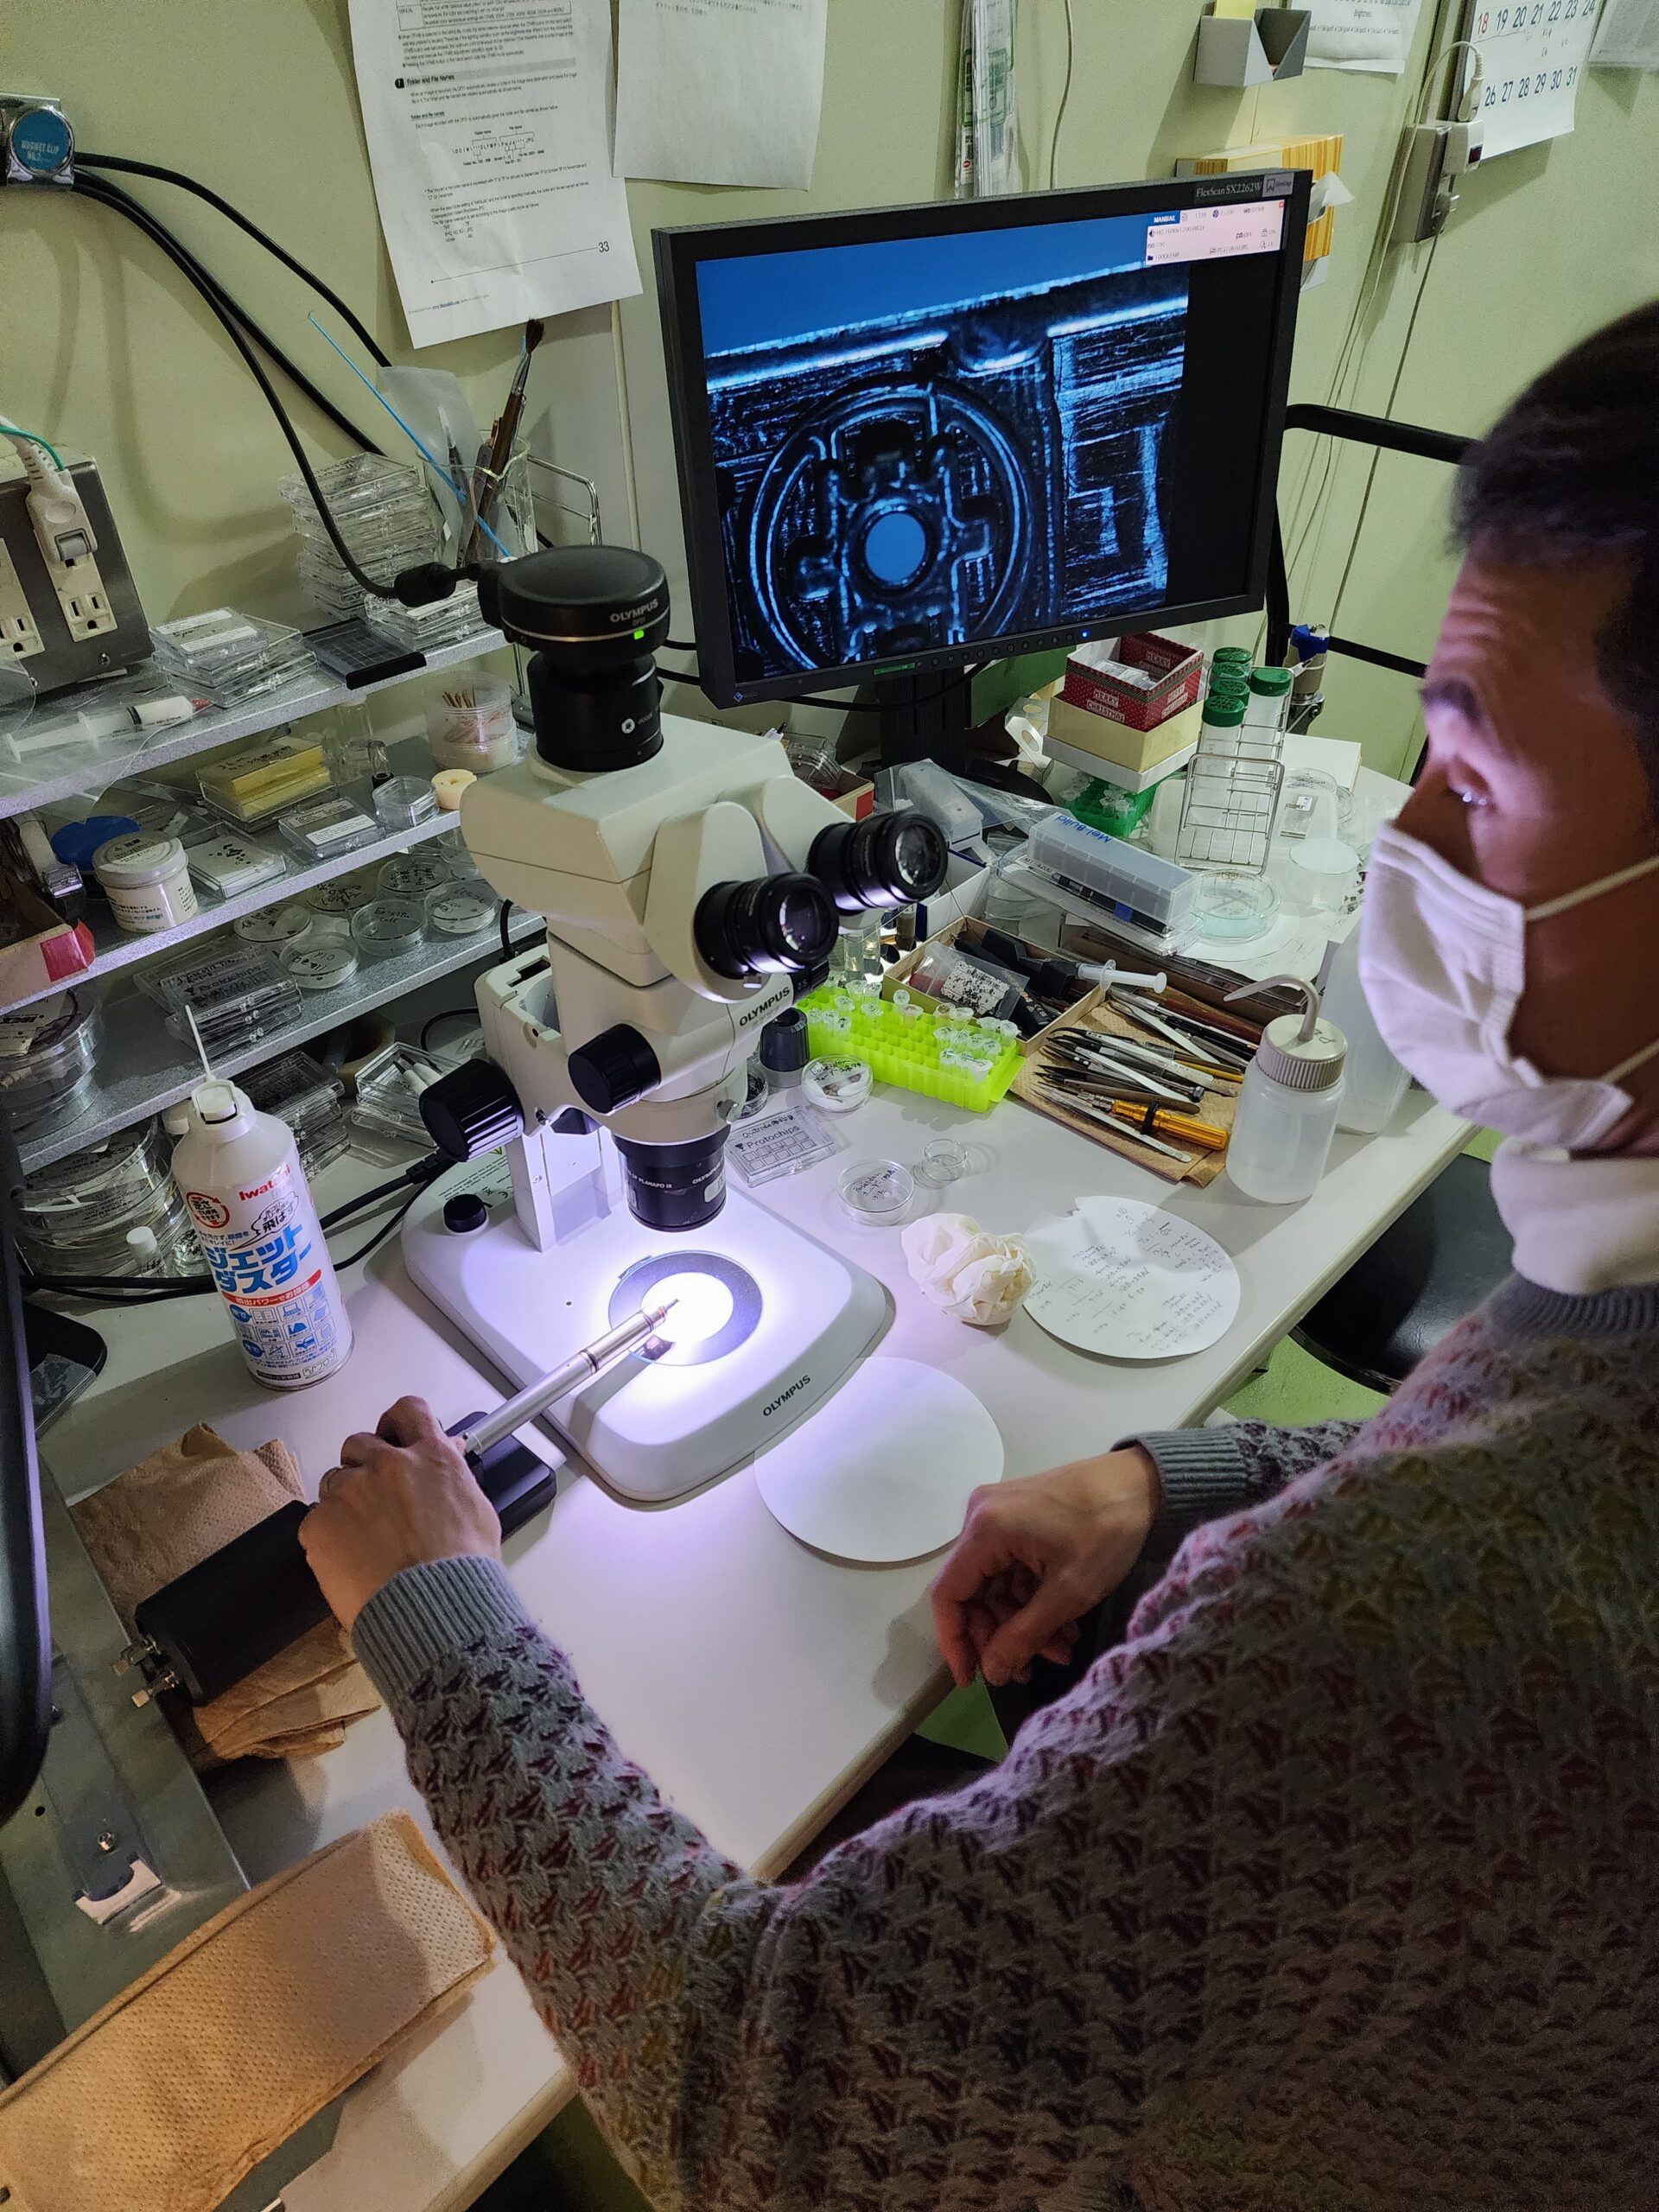 A man sits in front of a lab bench cluttered with research materials and tools. The man is facing a microscope. A light on the microscope illuminates a rod that the man is holding beneath the microscope. A tiny microchip, the sample holder for the transmission electron microscope, is attached to the end of the rod under the microscope's objective lenses. A nearby computer screen displays a magnified view of the sample holder, which looks like a silhouette of wires and compartments on a field of blue.